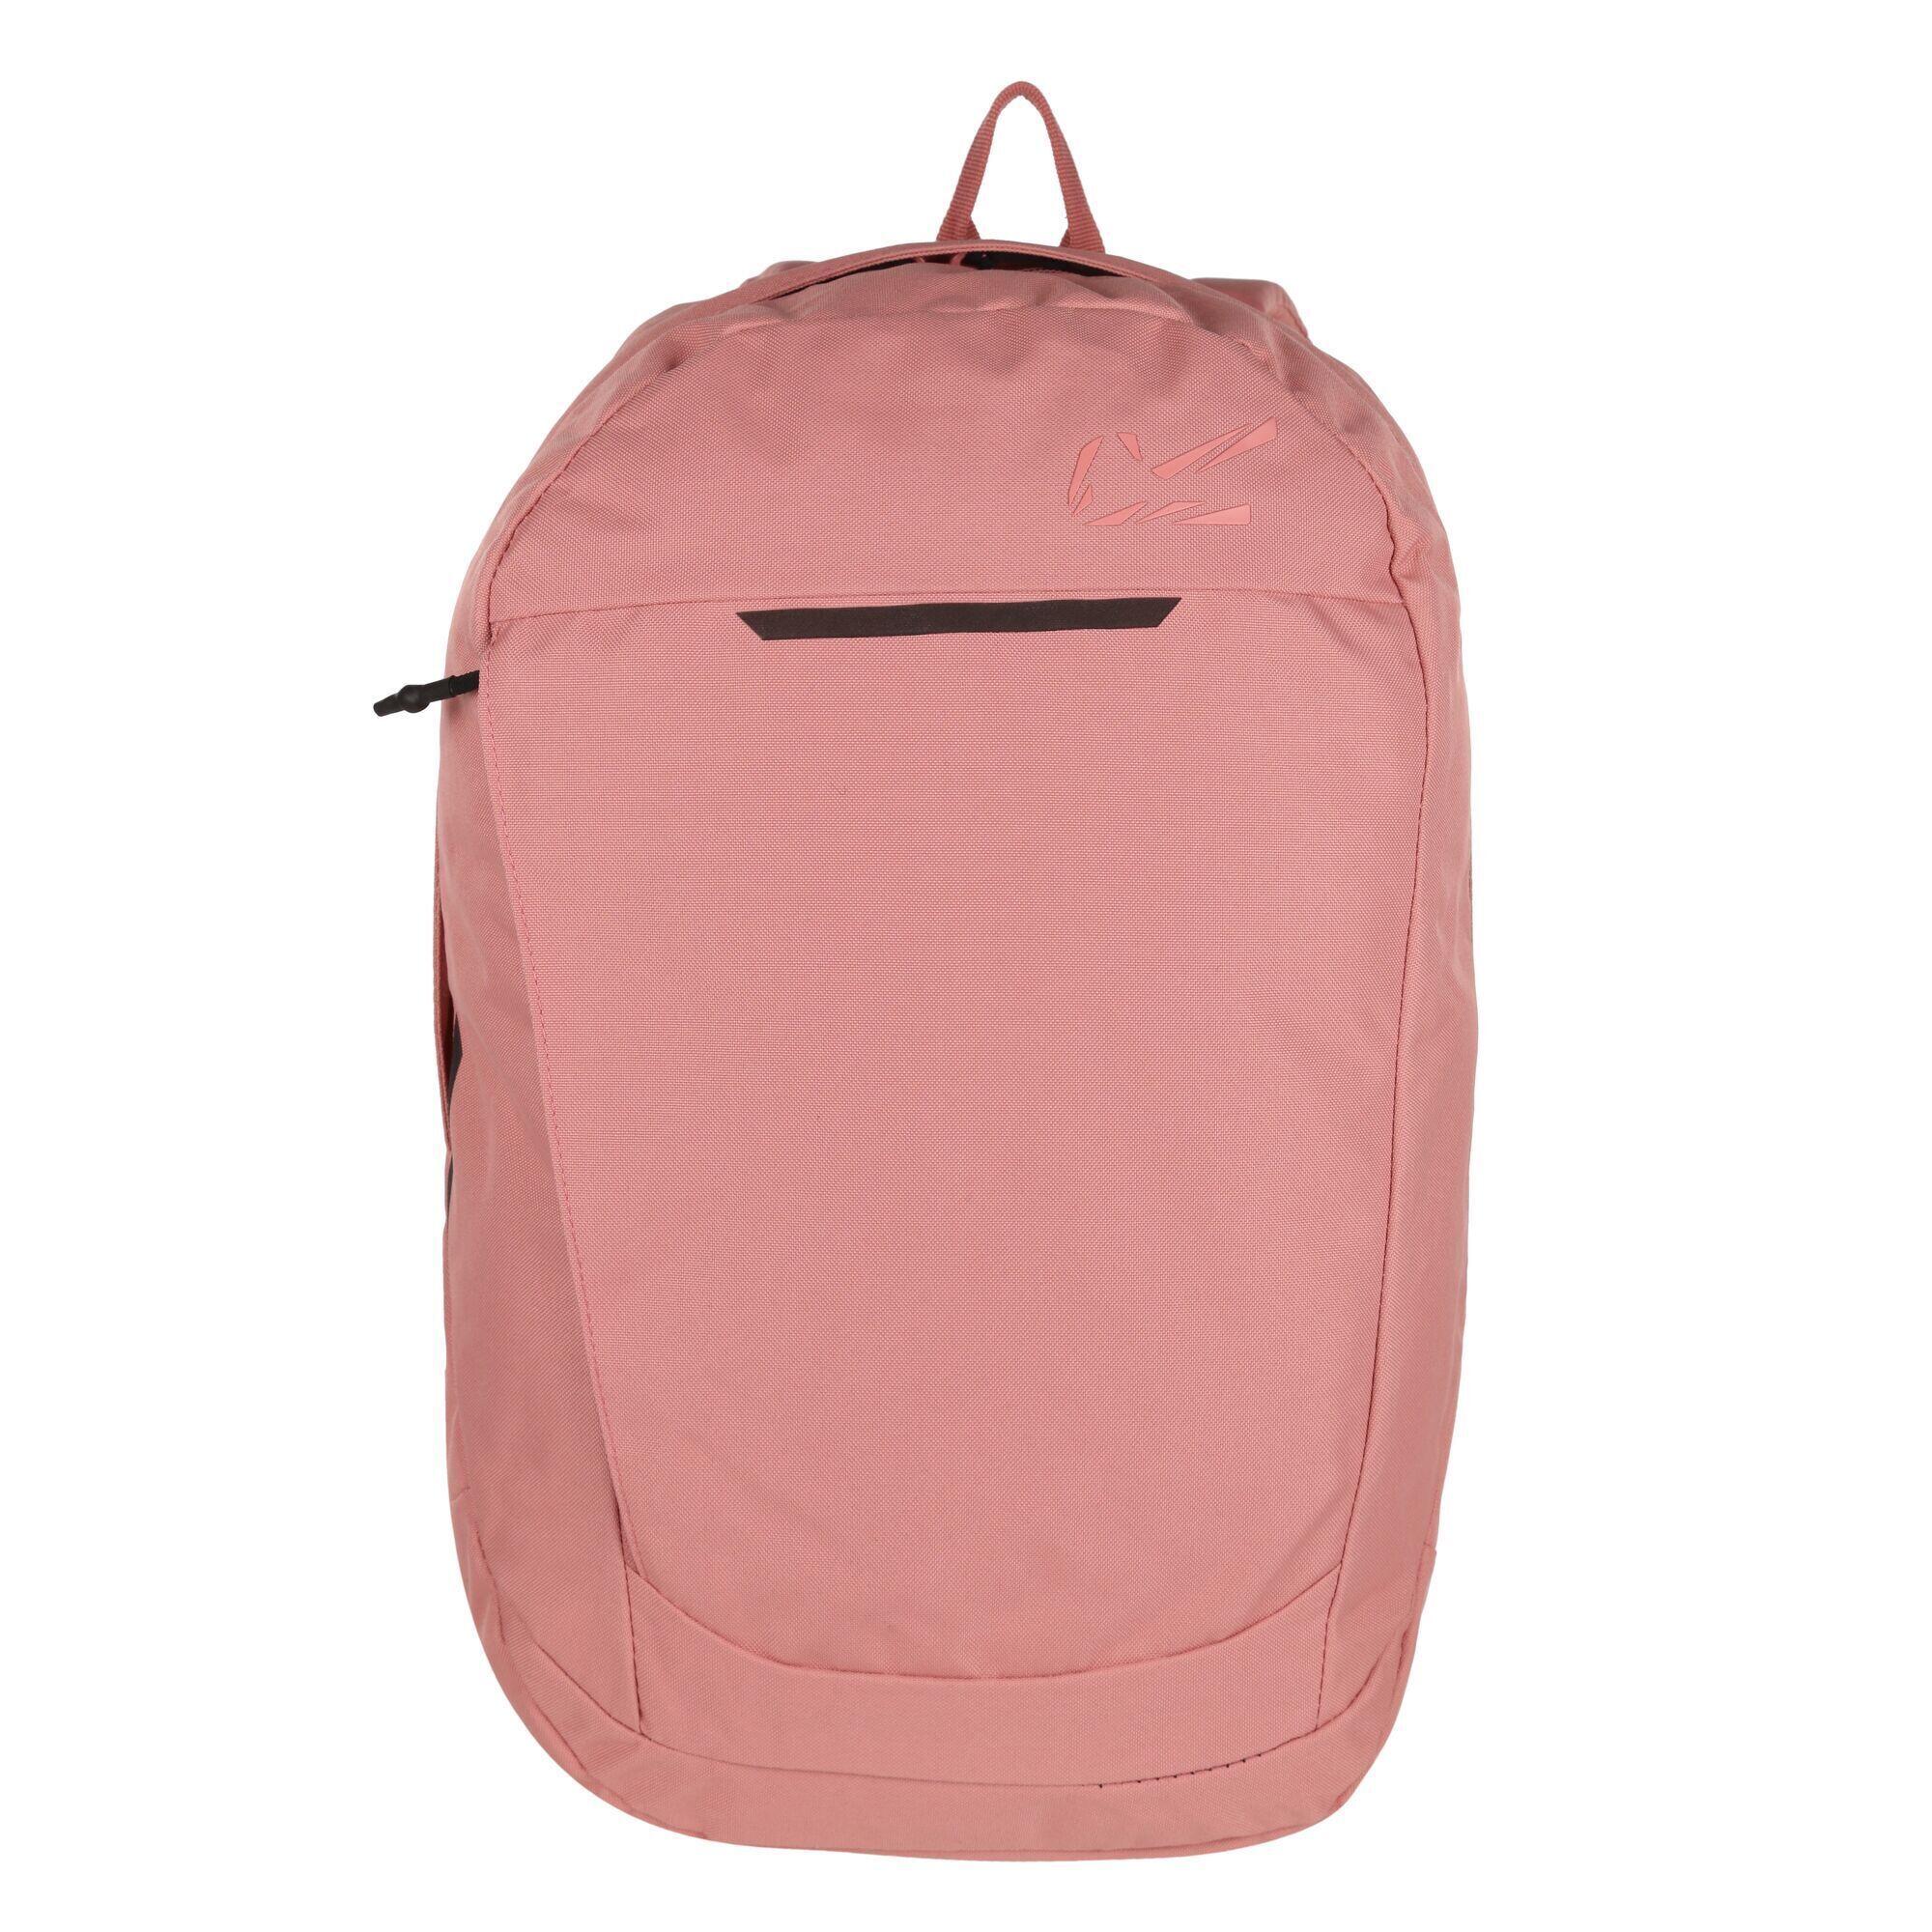 Backpack (Dusty Rose) 1/4